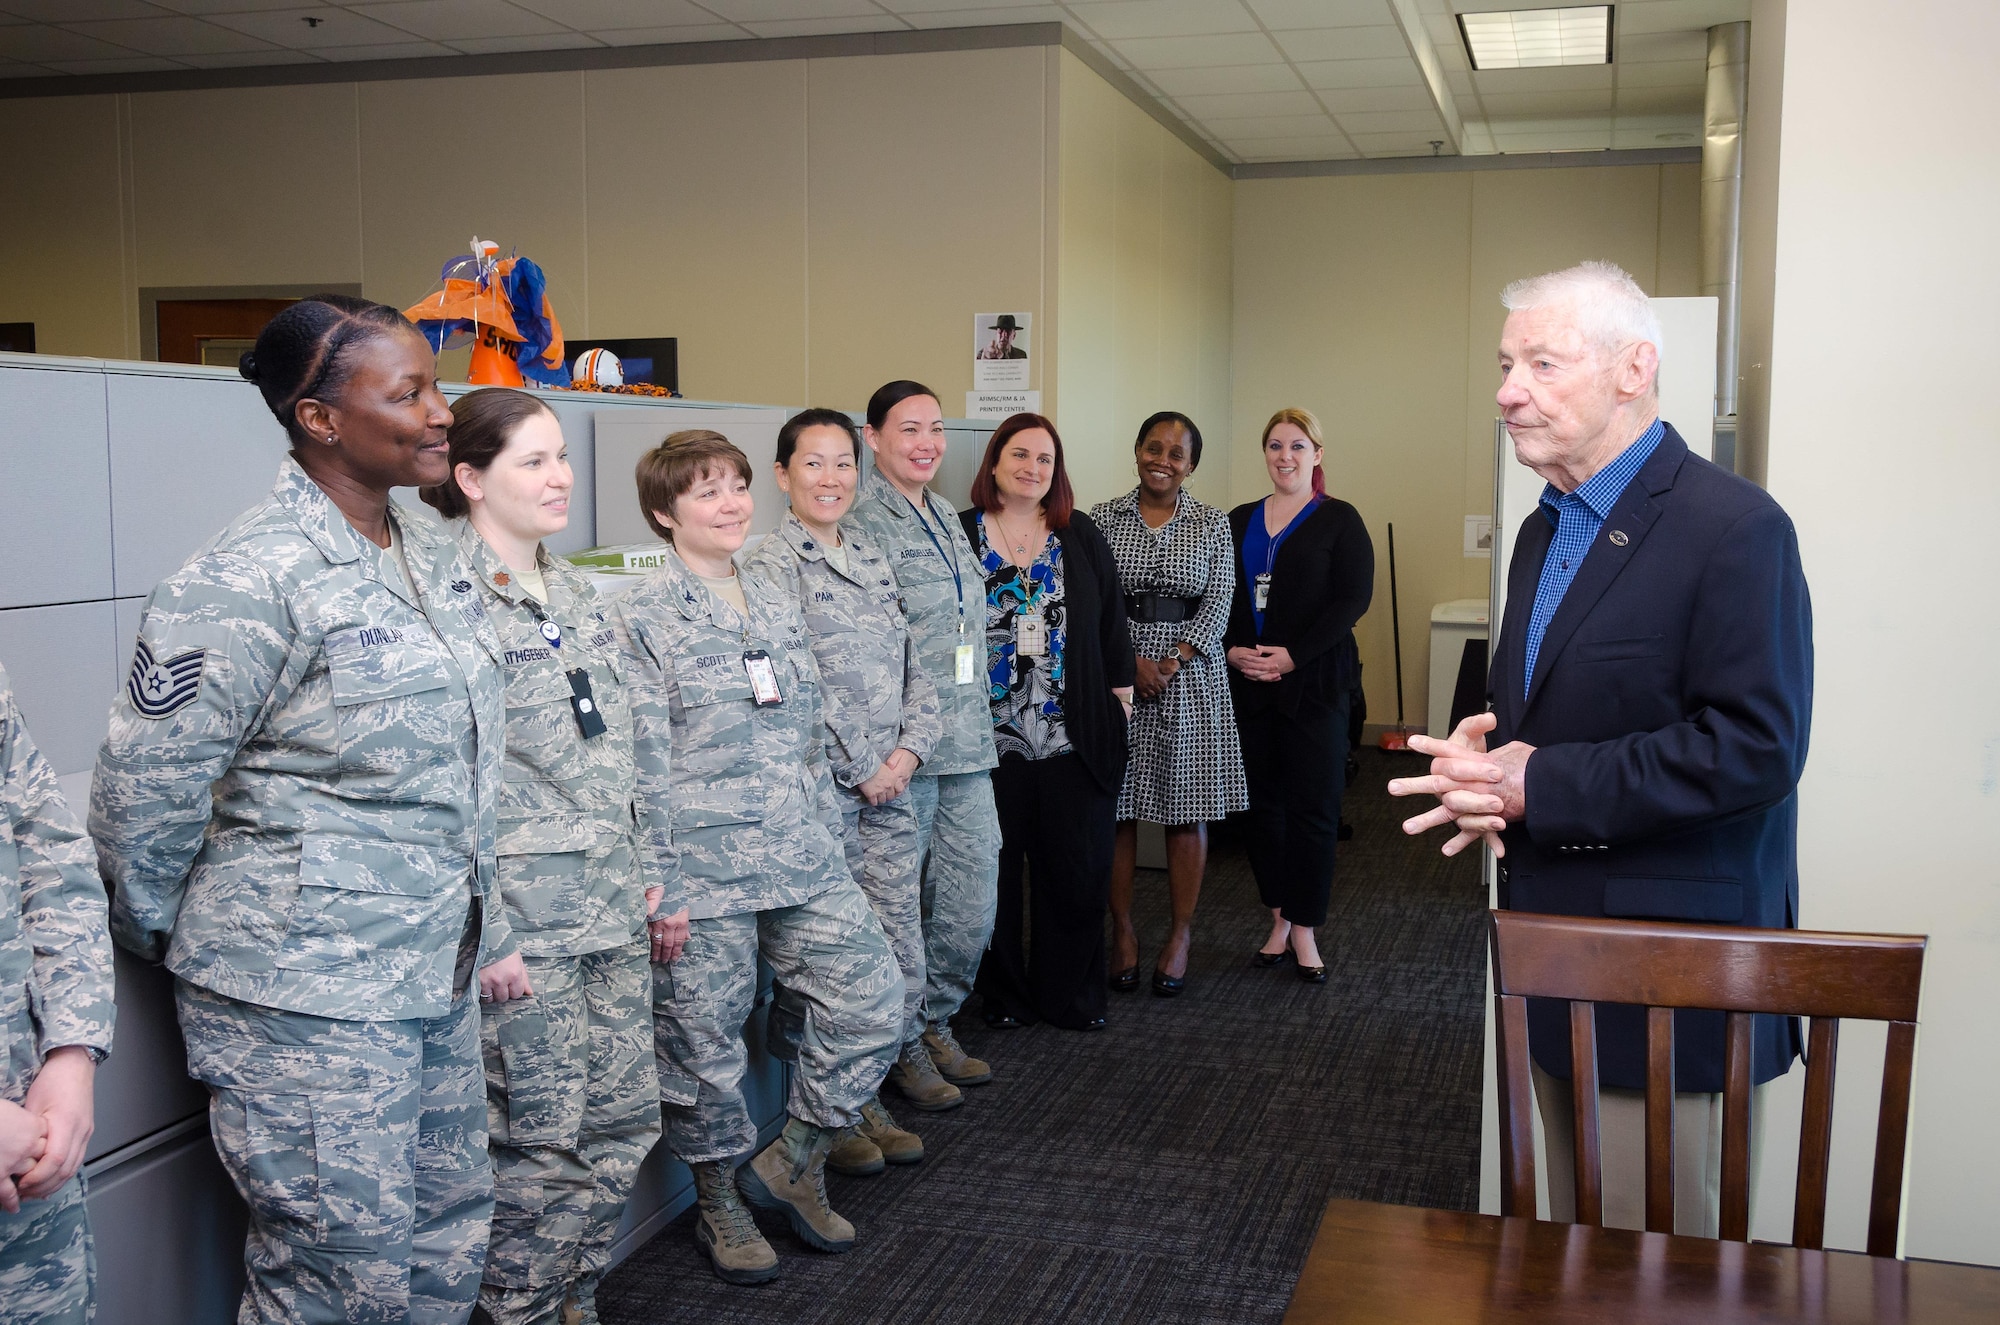 Retired Chief Master Sgt. Robert Gaylor visits with Airmen from the Air Force Installation and Mission Support Center at Joint Base San Antonio-Lackland, March 30, 2017. Gaylor was the fifth Chief Master Sergeant of the Air Force serving from 1977-1979. Now at age 86, Gaylor continues to visit Airmen across the Air Force. (U.S. Air Force photo by Malcolm McClendon)